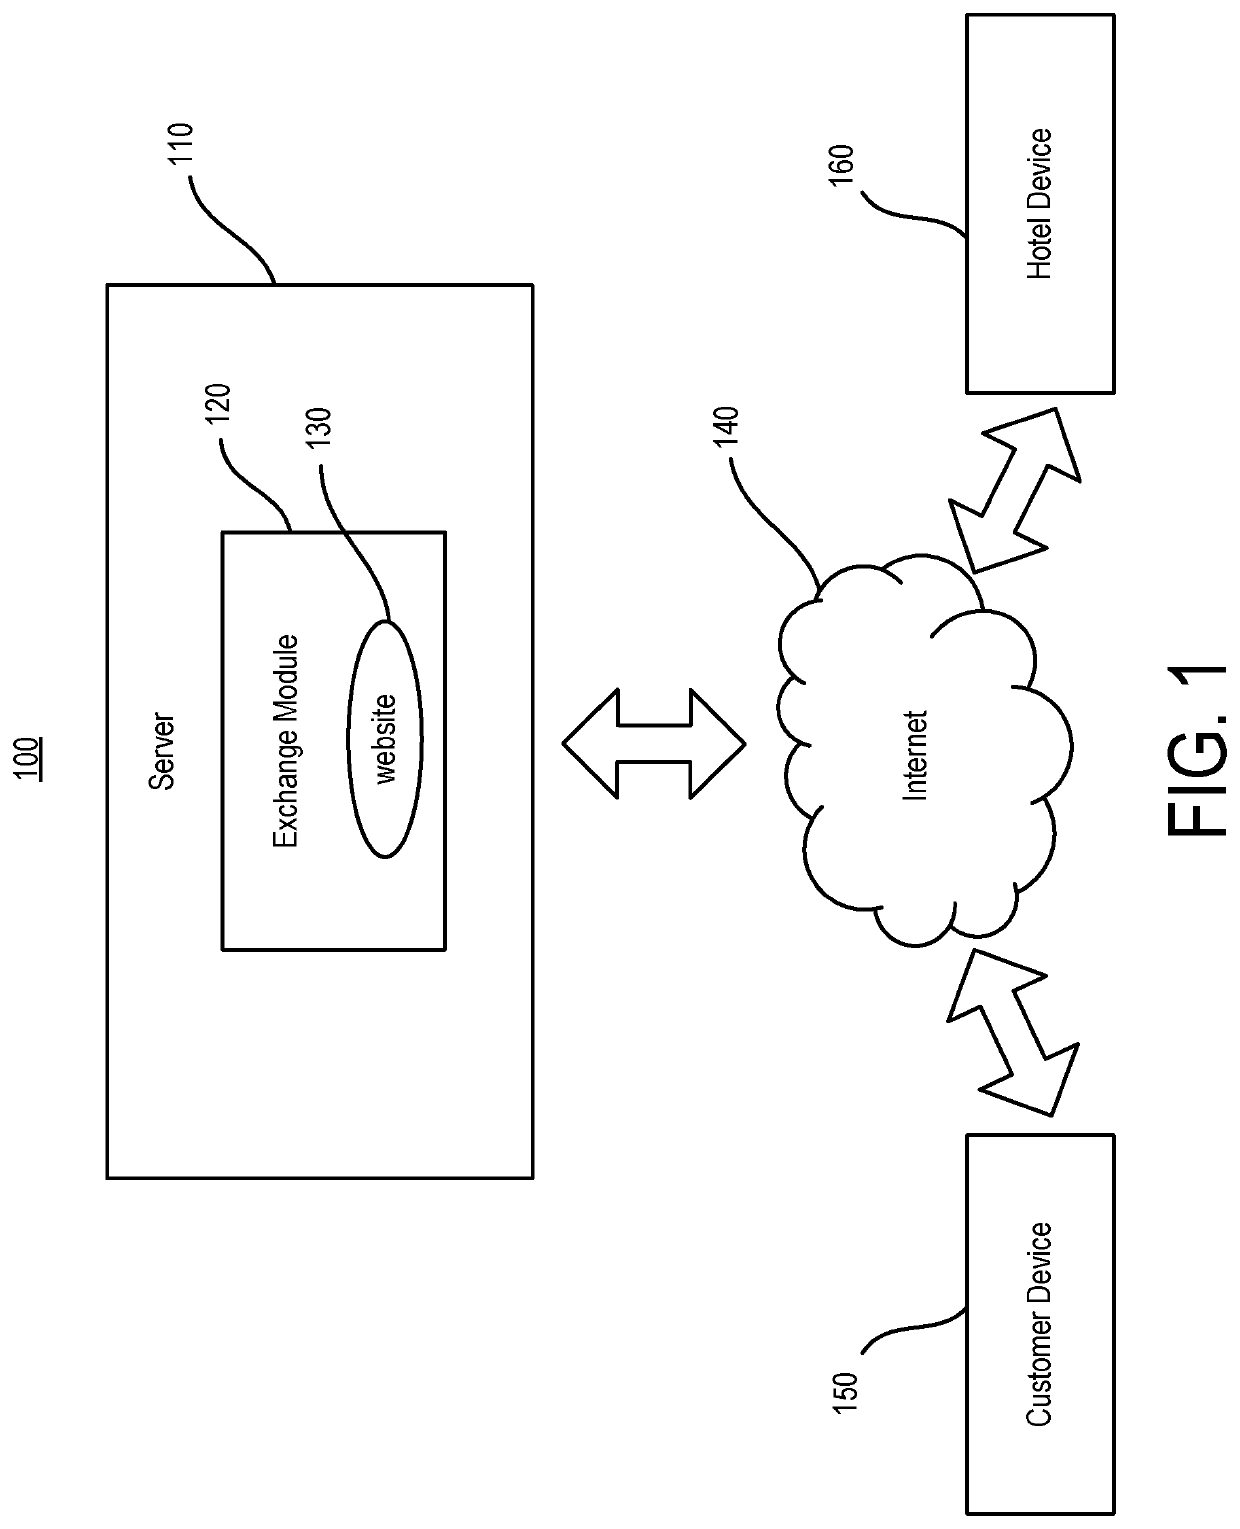 System and method for creating an online exchange between lodging seekers and lodging providers for negotiating the price of rooms